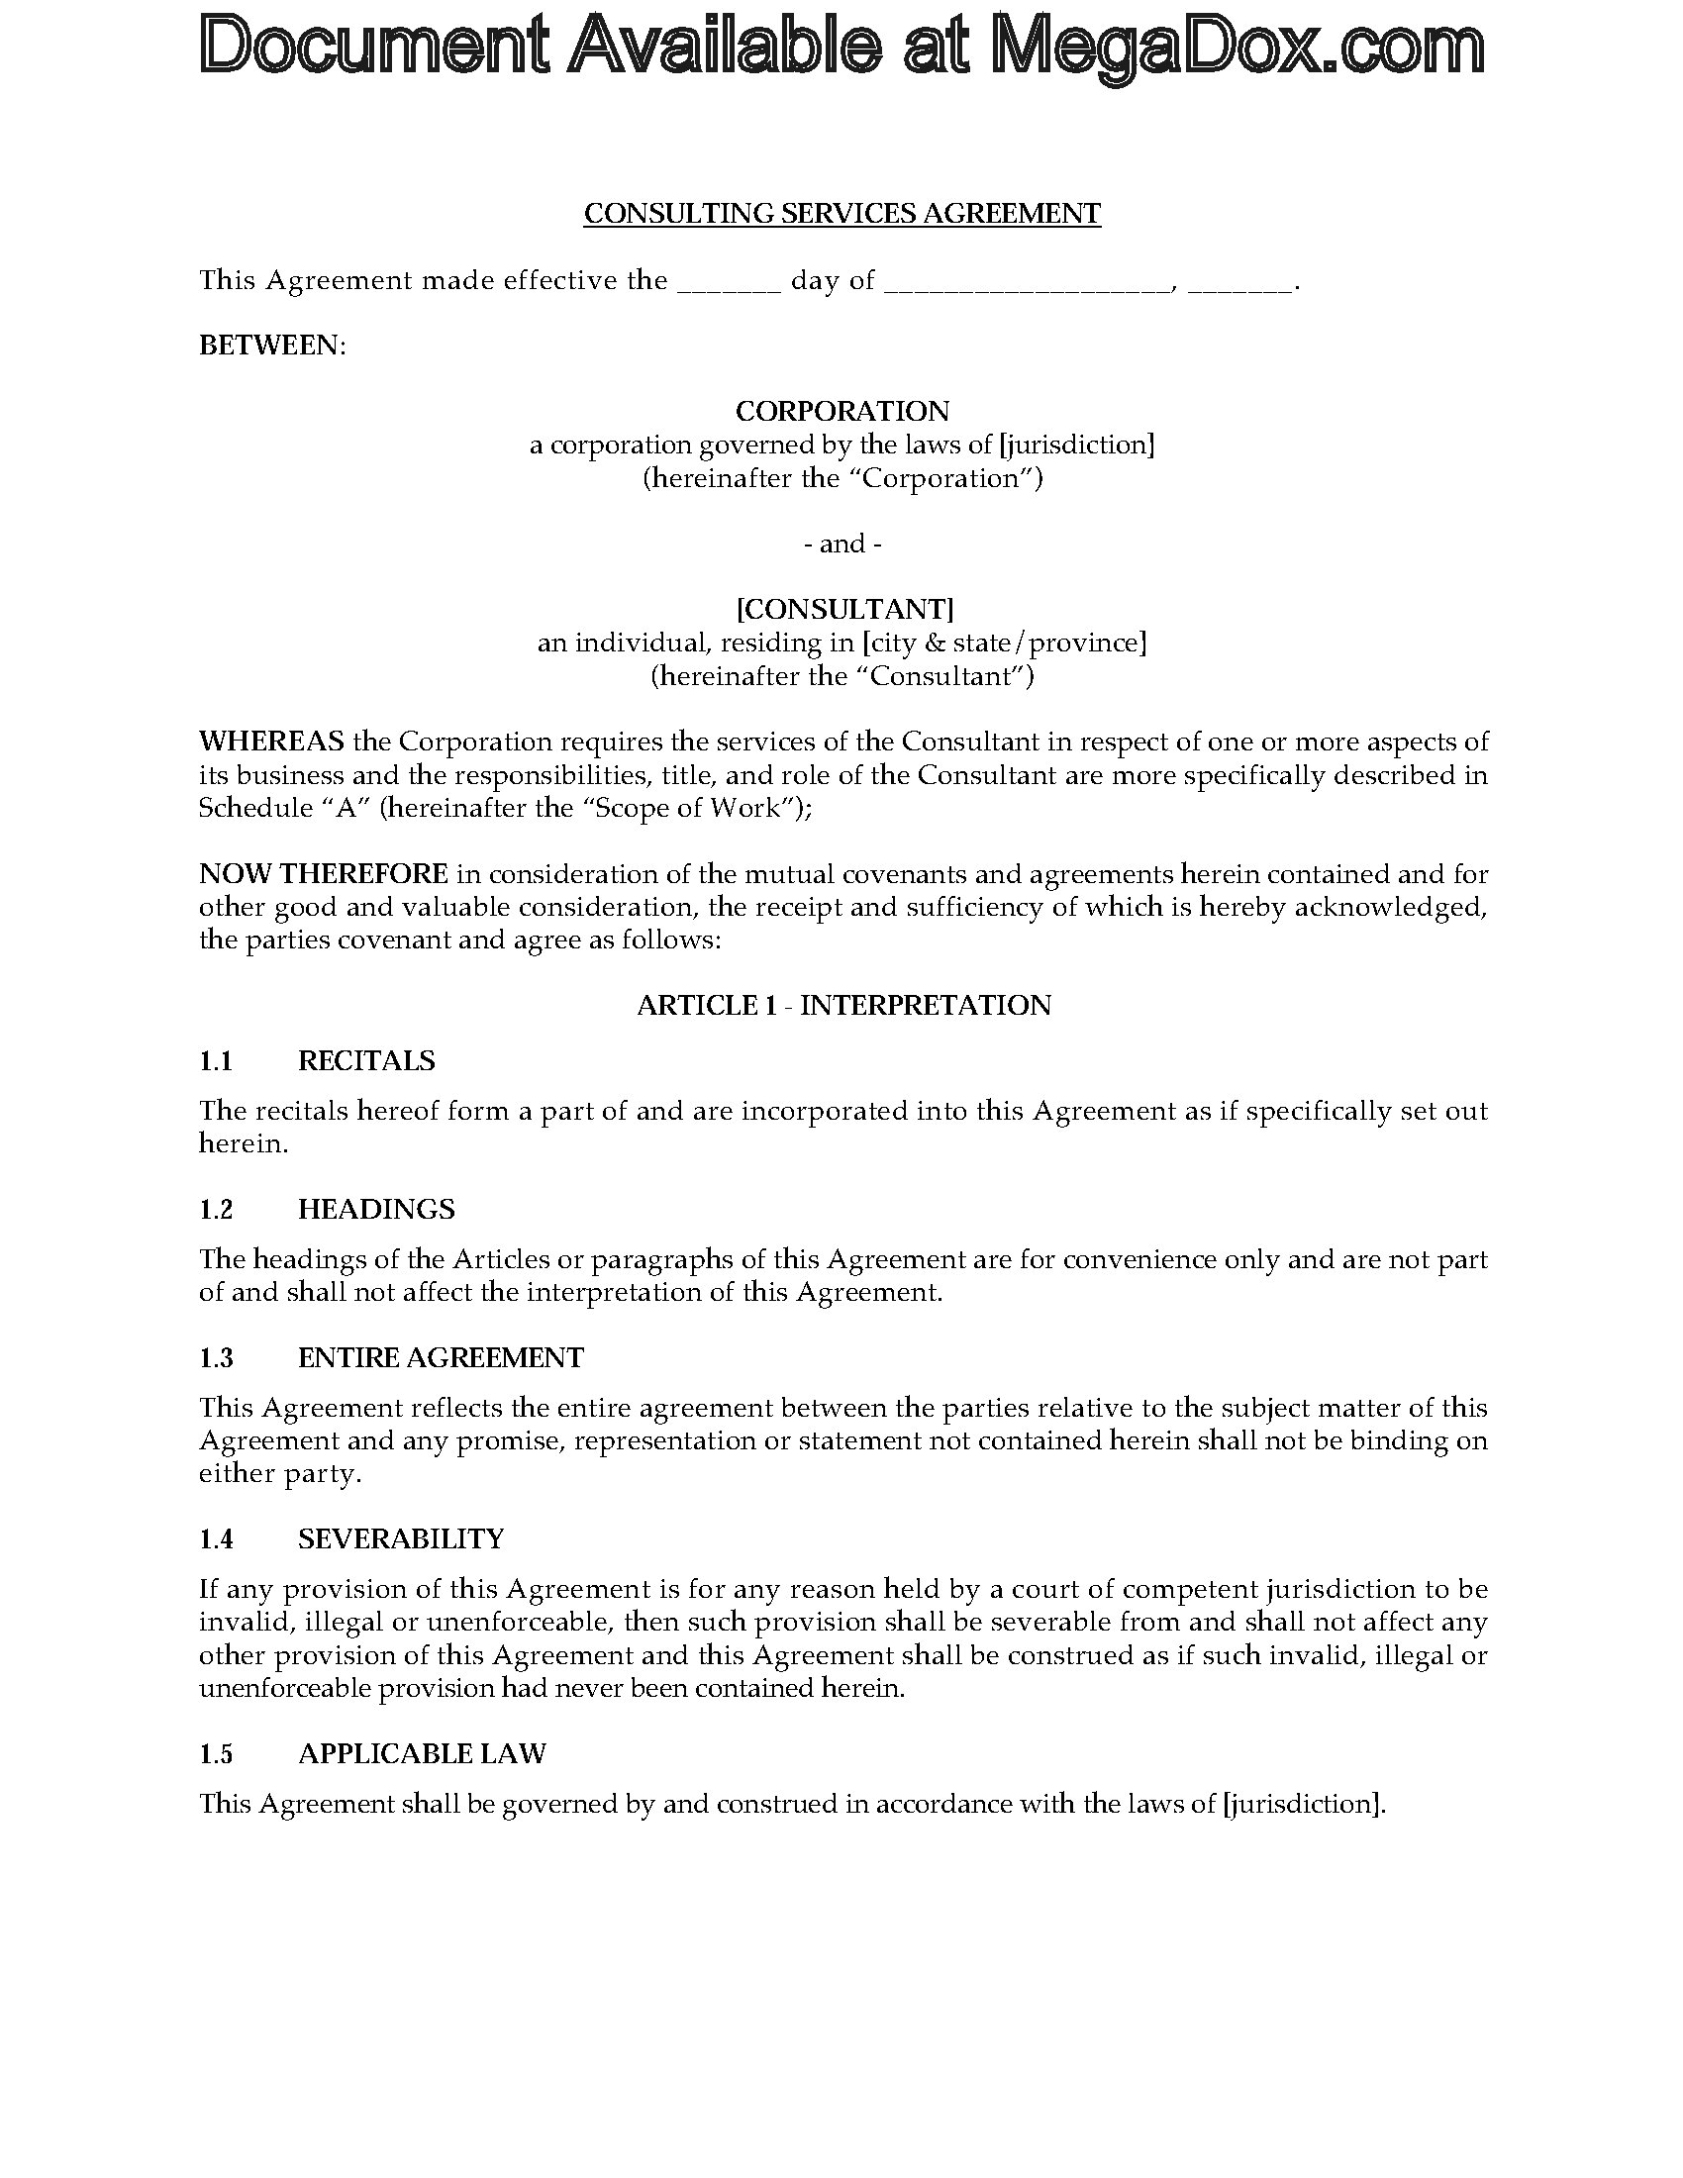 Canada Consulting Services Agreement | Legal Forms And Business With Regard To Consulting Service Agreement Template